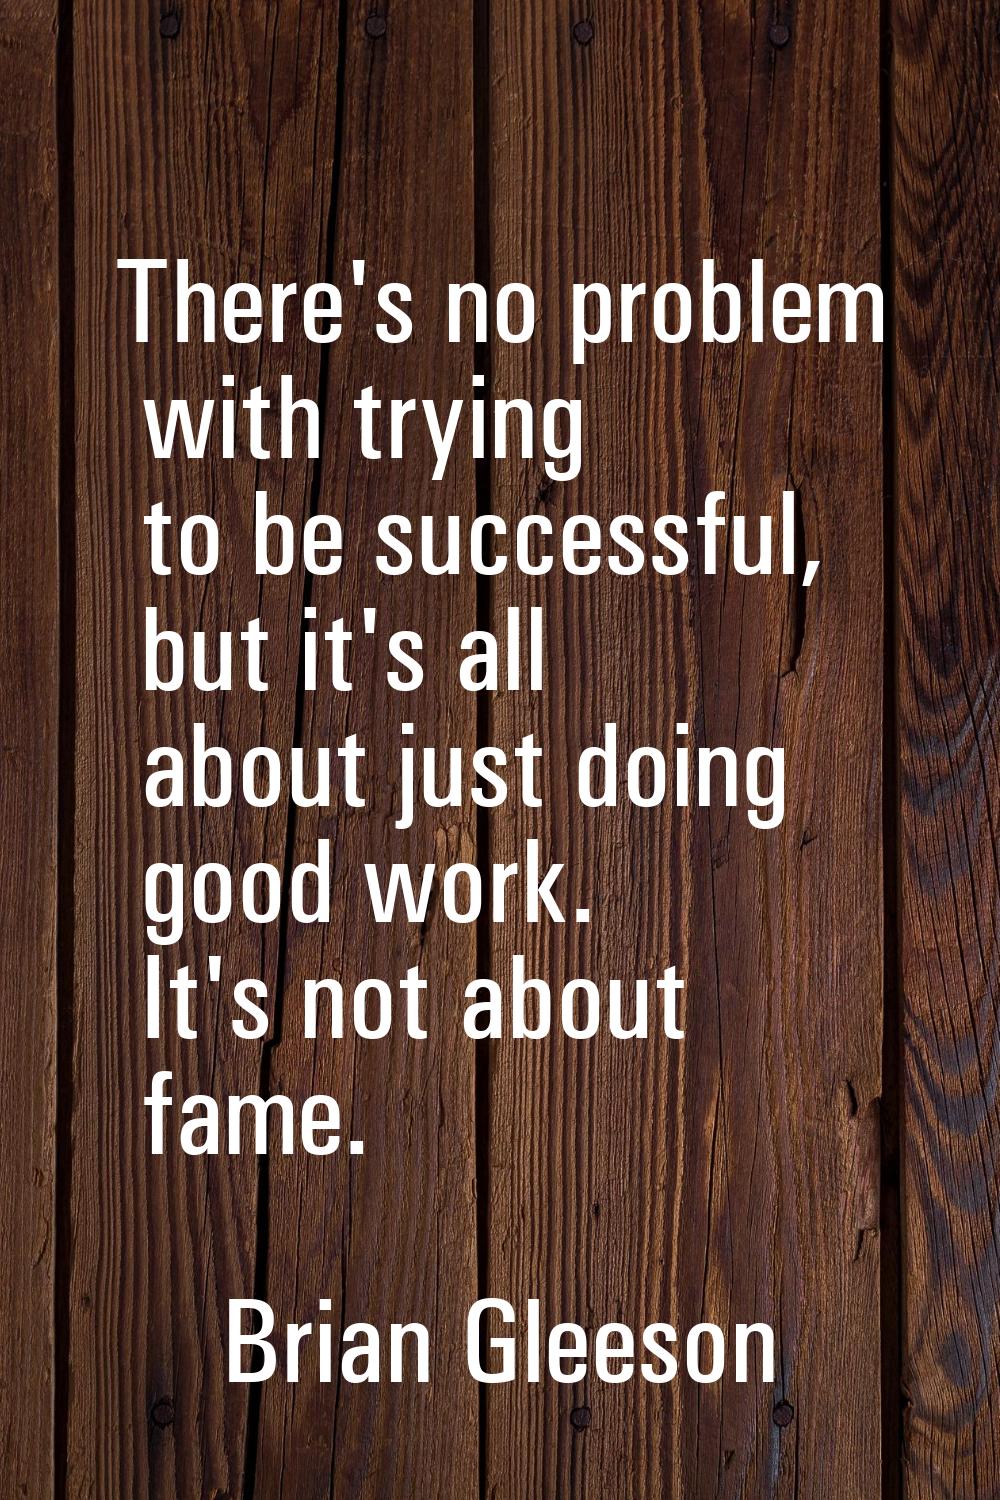 There's no problem with trying to be successful, but it's all about just doing good work. It's not 